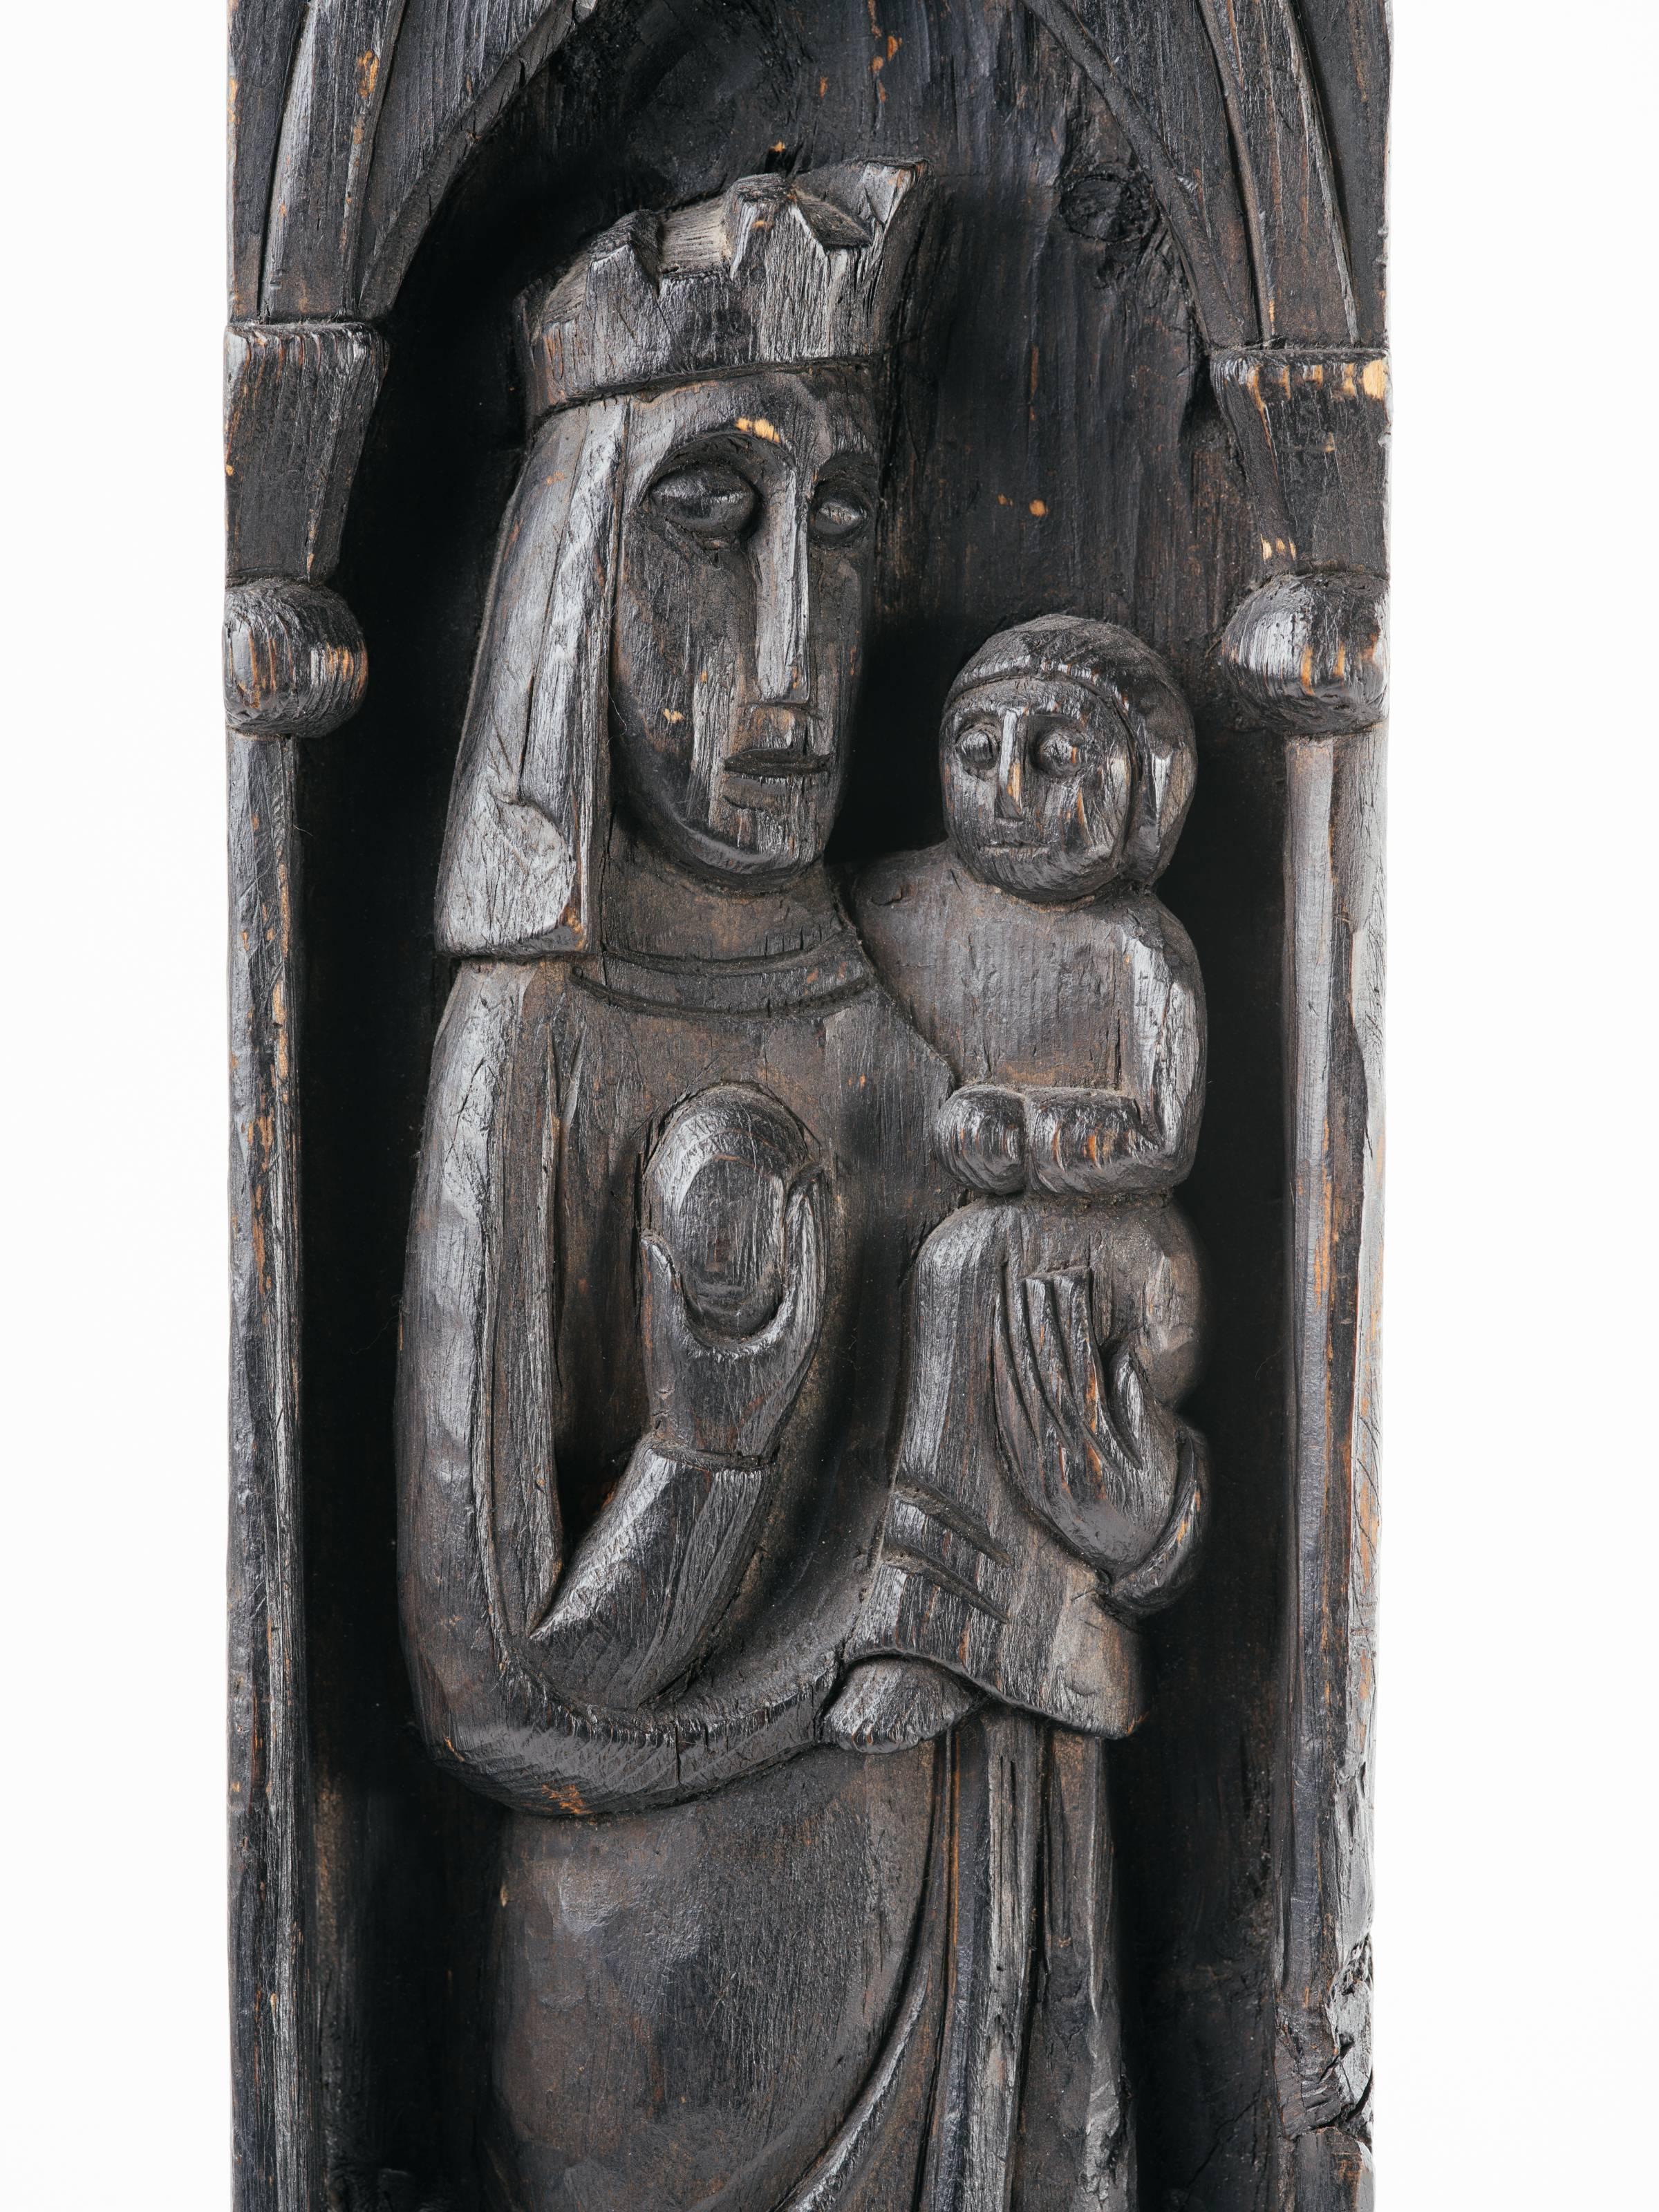 Victorian monolith wood plaque with hand-carved relief design depicting the Virgin Mary and baby Jesus.  The carving features Gothic arches and columns with floral shields along the bottom. Has ebony finish and fitted with small hook for wall